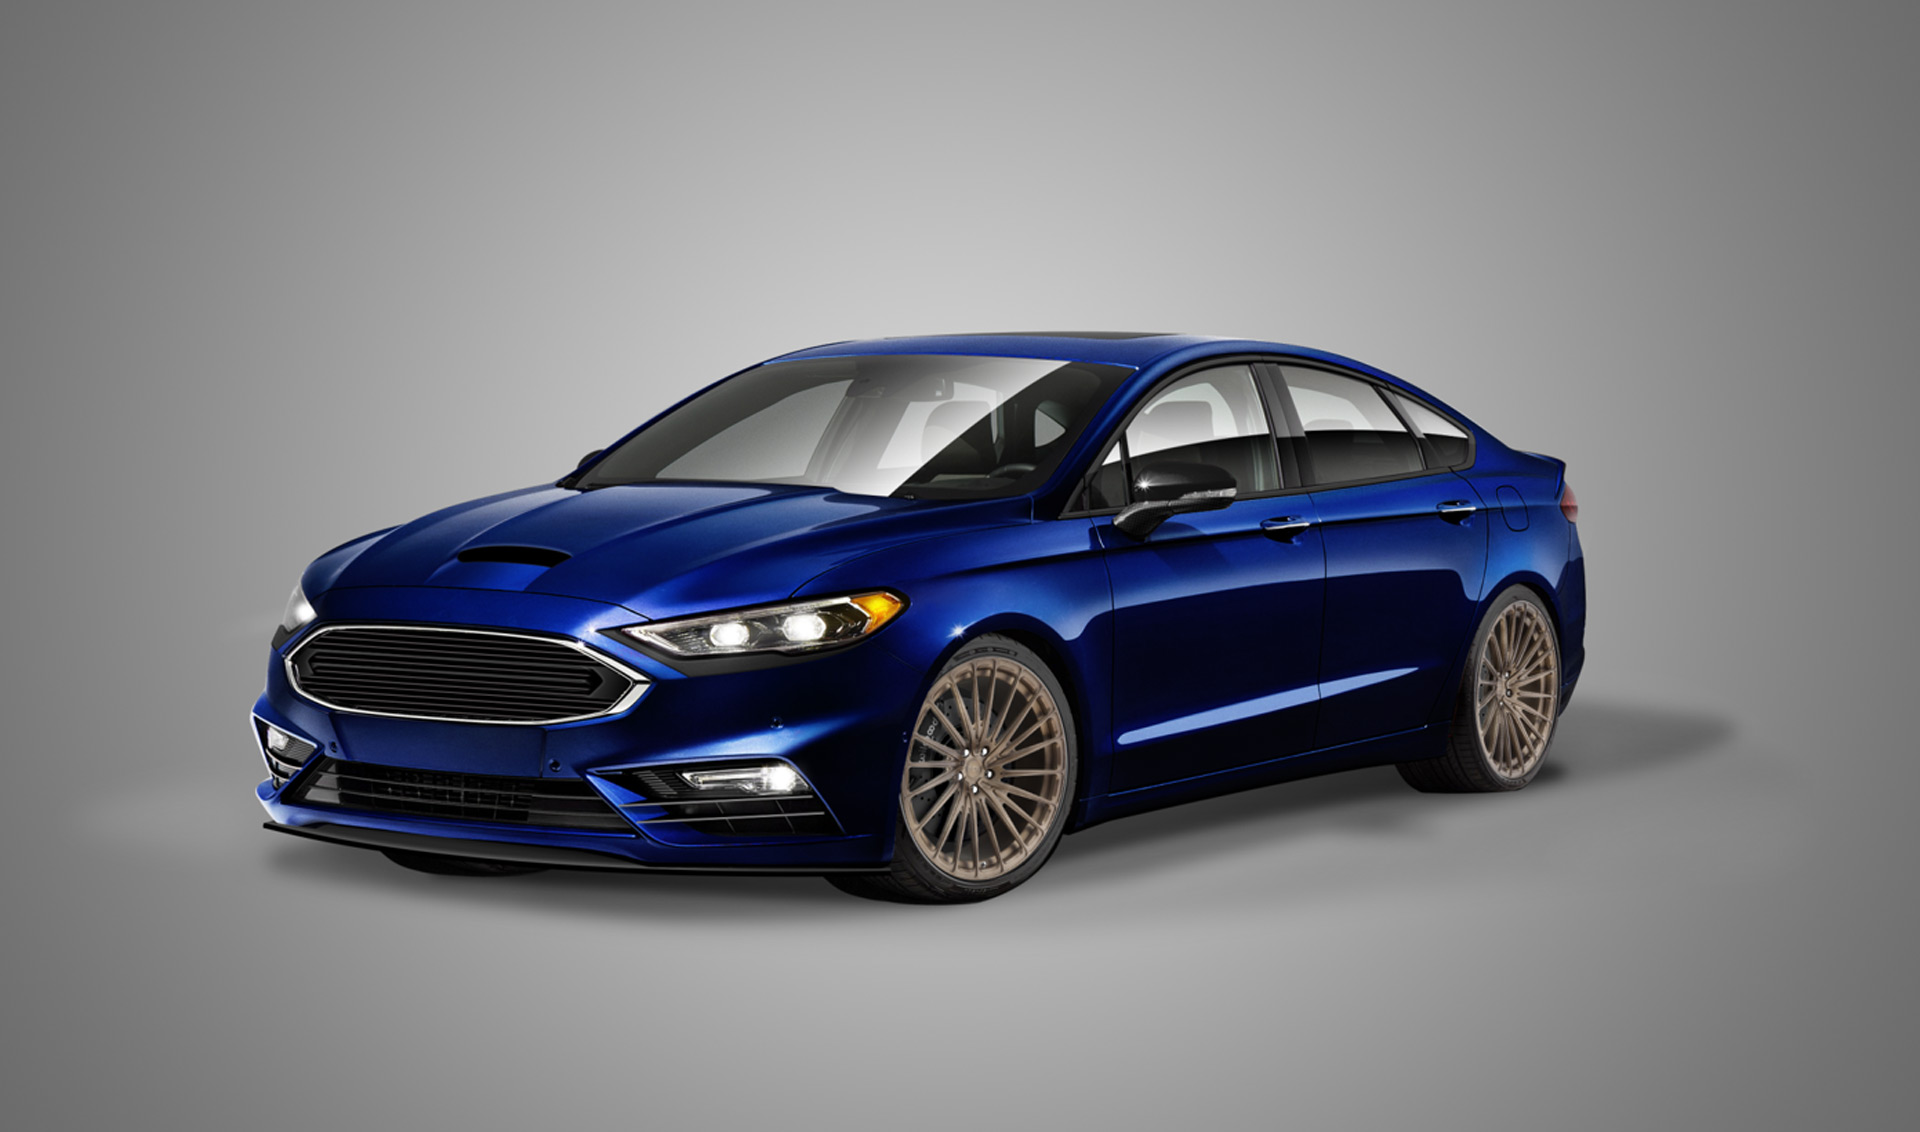 2017 Fusion Sport to join modified Ford fleet at SEMA